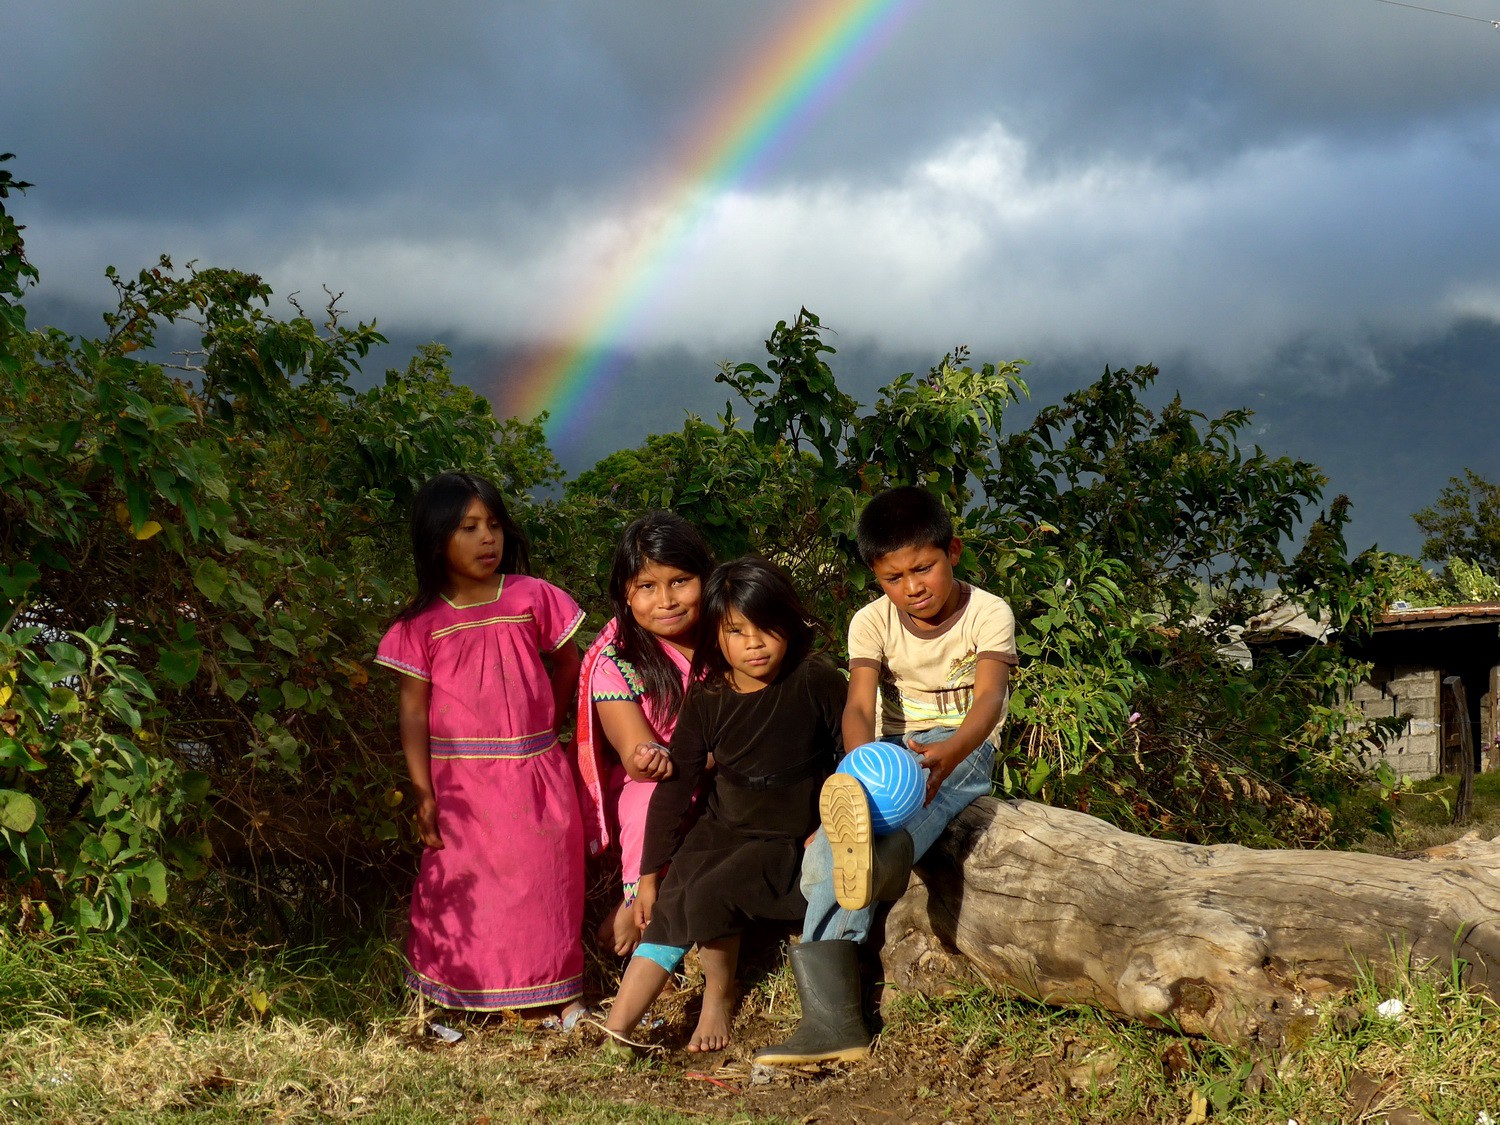 Kids with rainbow - Our camping and parking place on foot of Volcan Barú